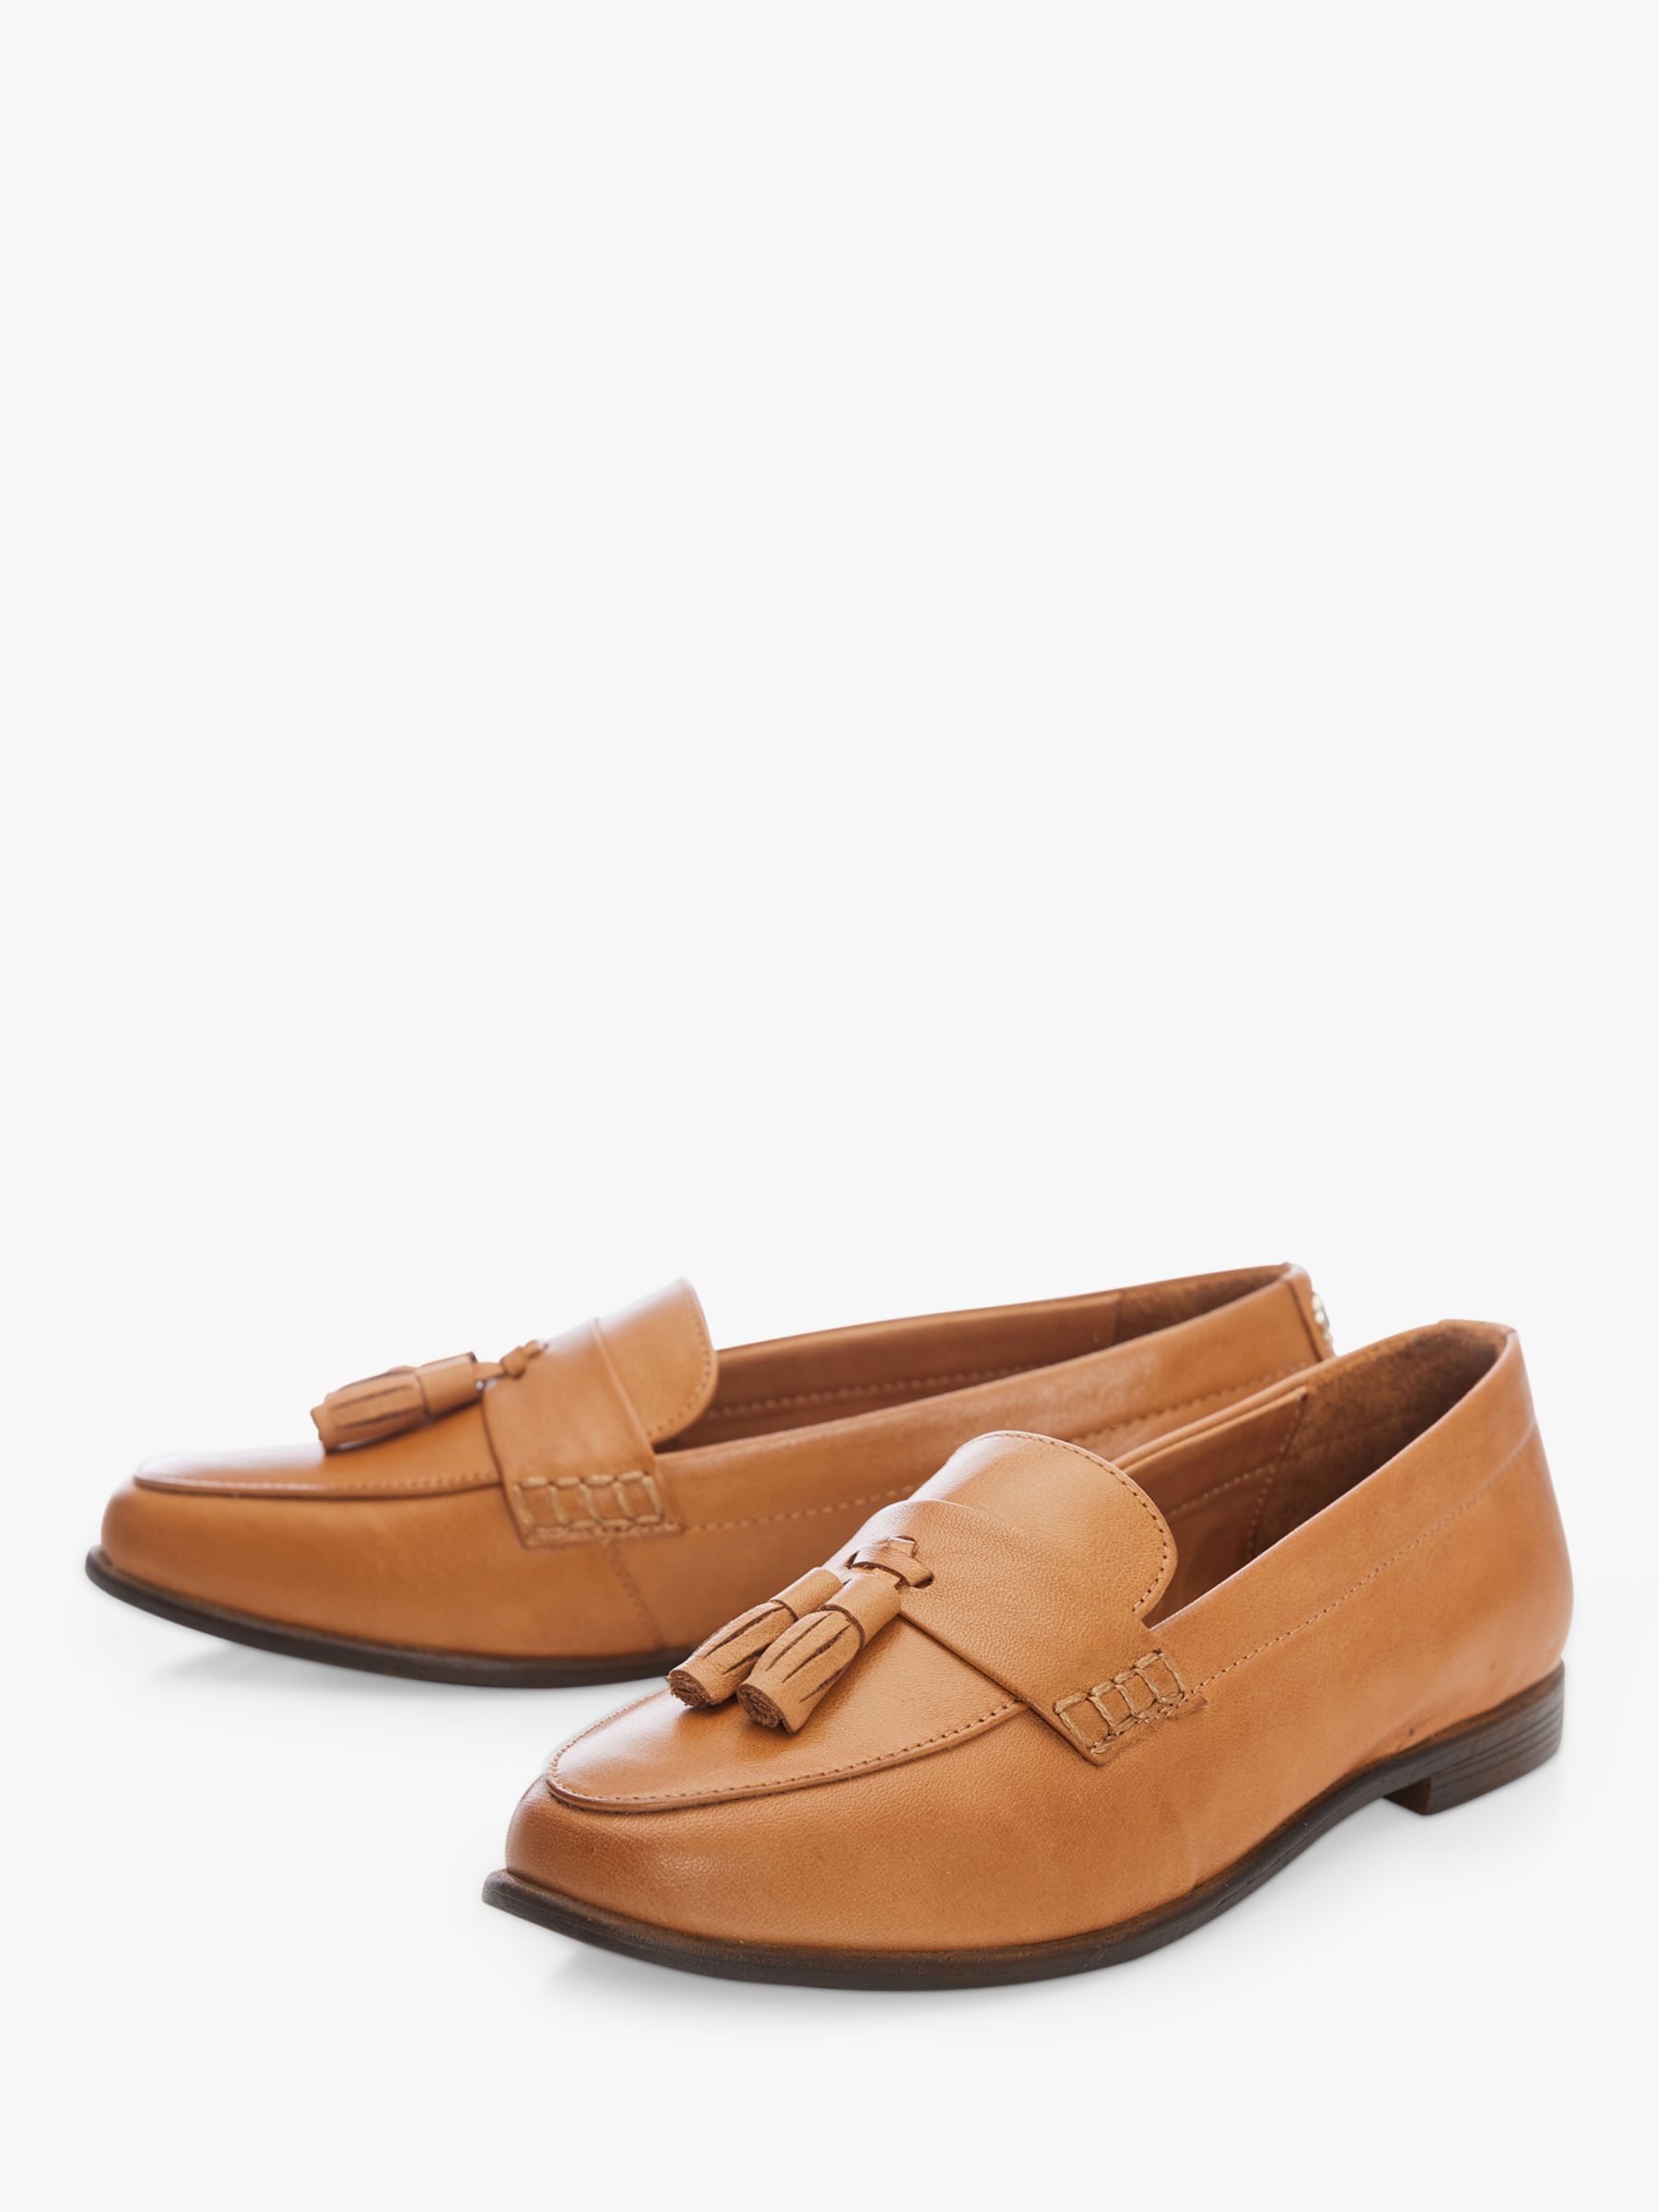 Moda in Pelle Forina Leather Square Toe Loafers, Tan at John Lewis ...